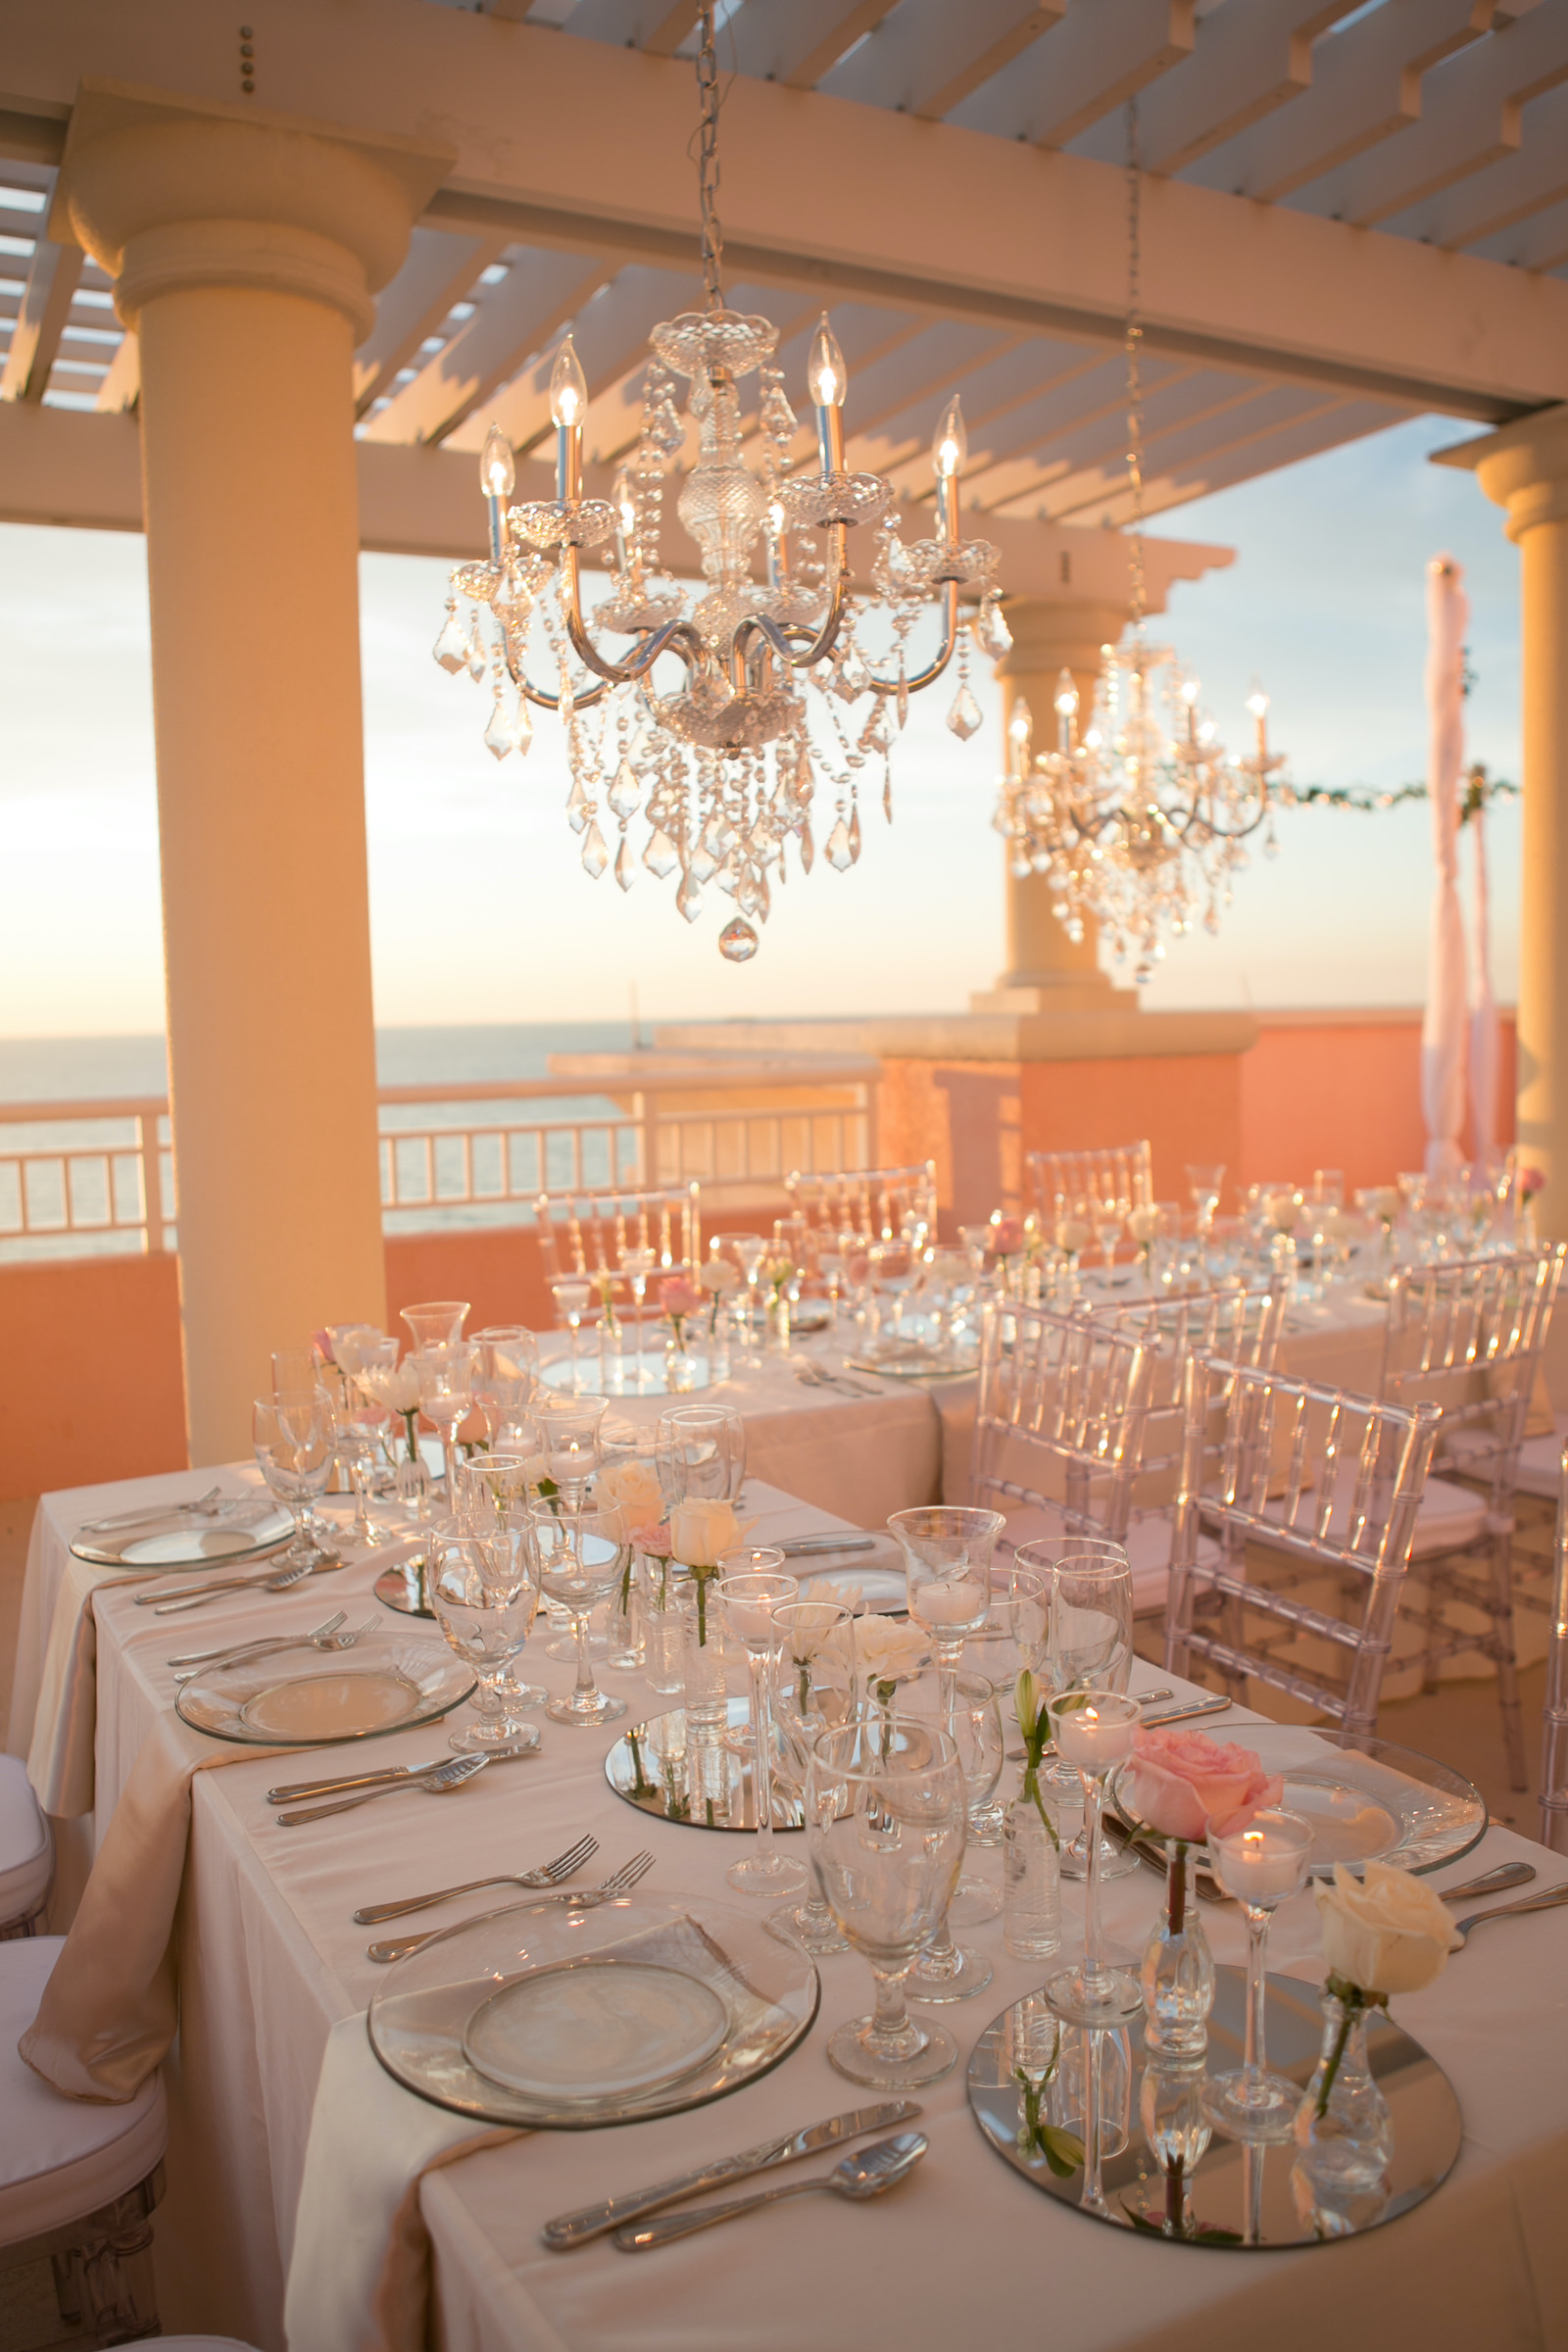 Elegant Modern Wedding Reception Decor on Rooftop Balcony of Waterfront Wedding Venue Hyatt Regency Clearwater Beach, Long Tables with Acrylic Chiavari Chairs, Hanging Crystal Chandeliers | Tampa Bay Wedding Photographer Carrie Wildes | Wedding Planner Coastal Coordinating | Wedding Rentals Outside the Box